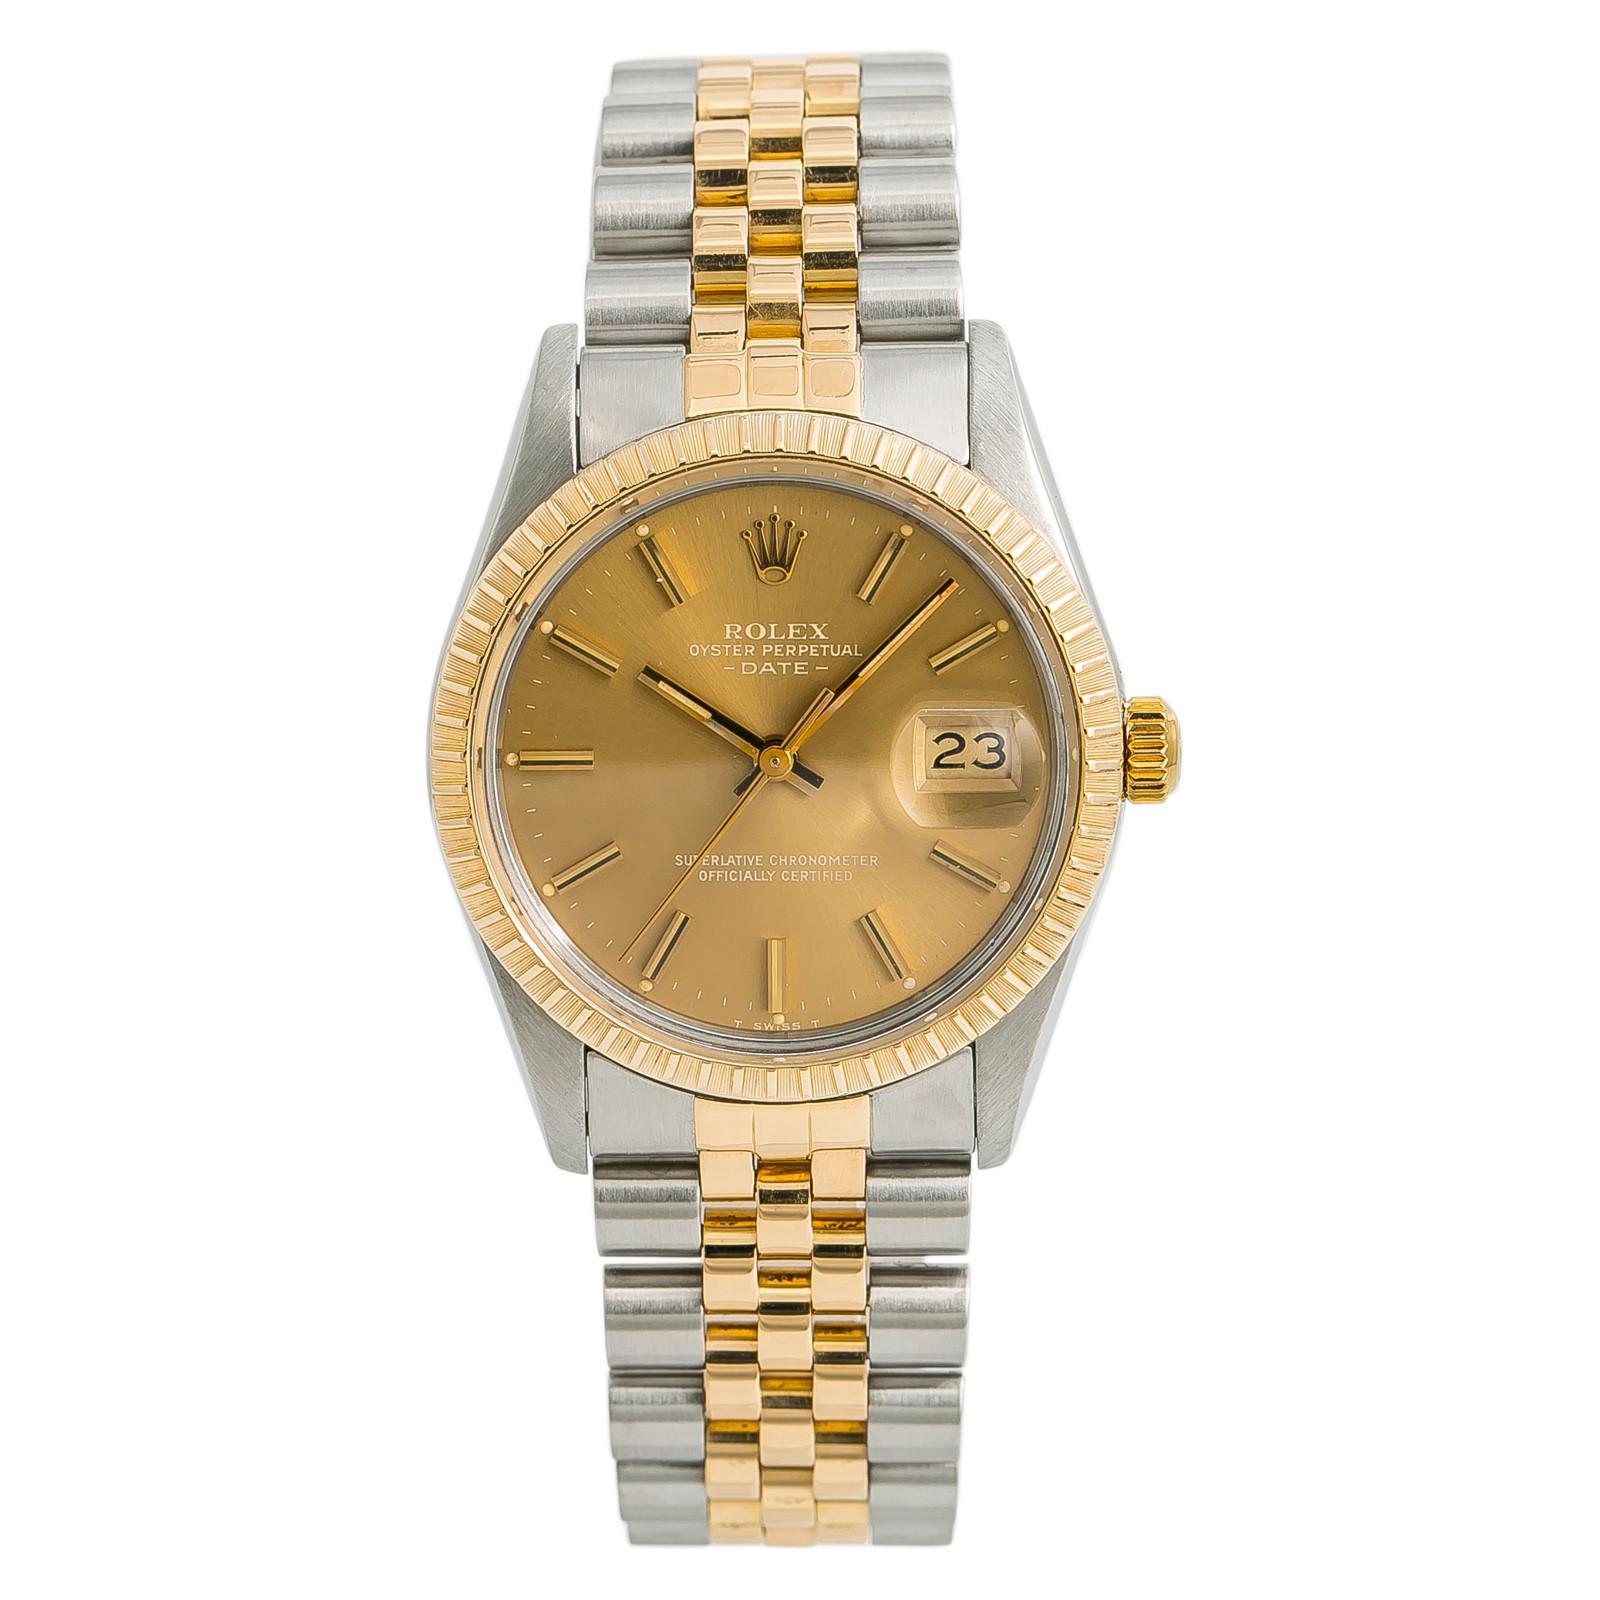 Rolex Date4680, Dial Certified Authentic For Sale